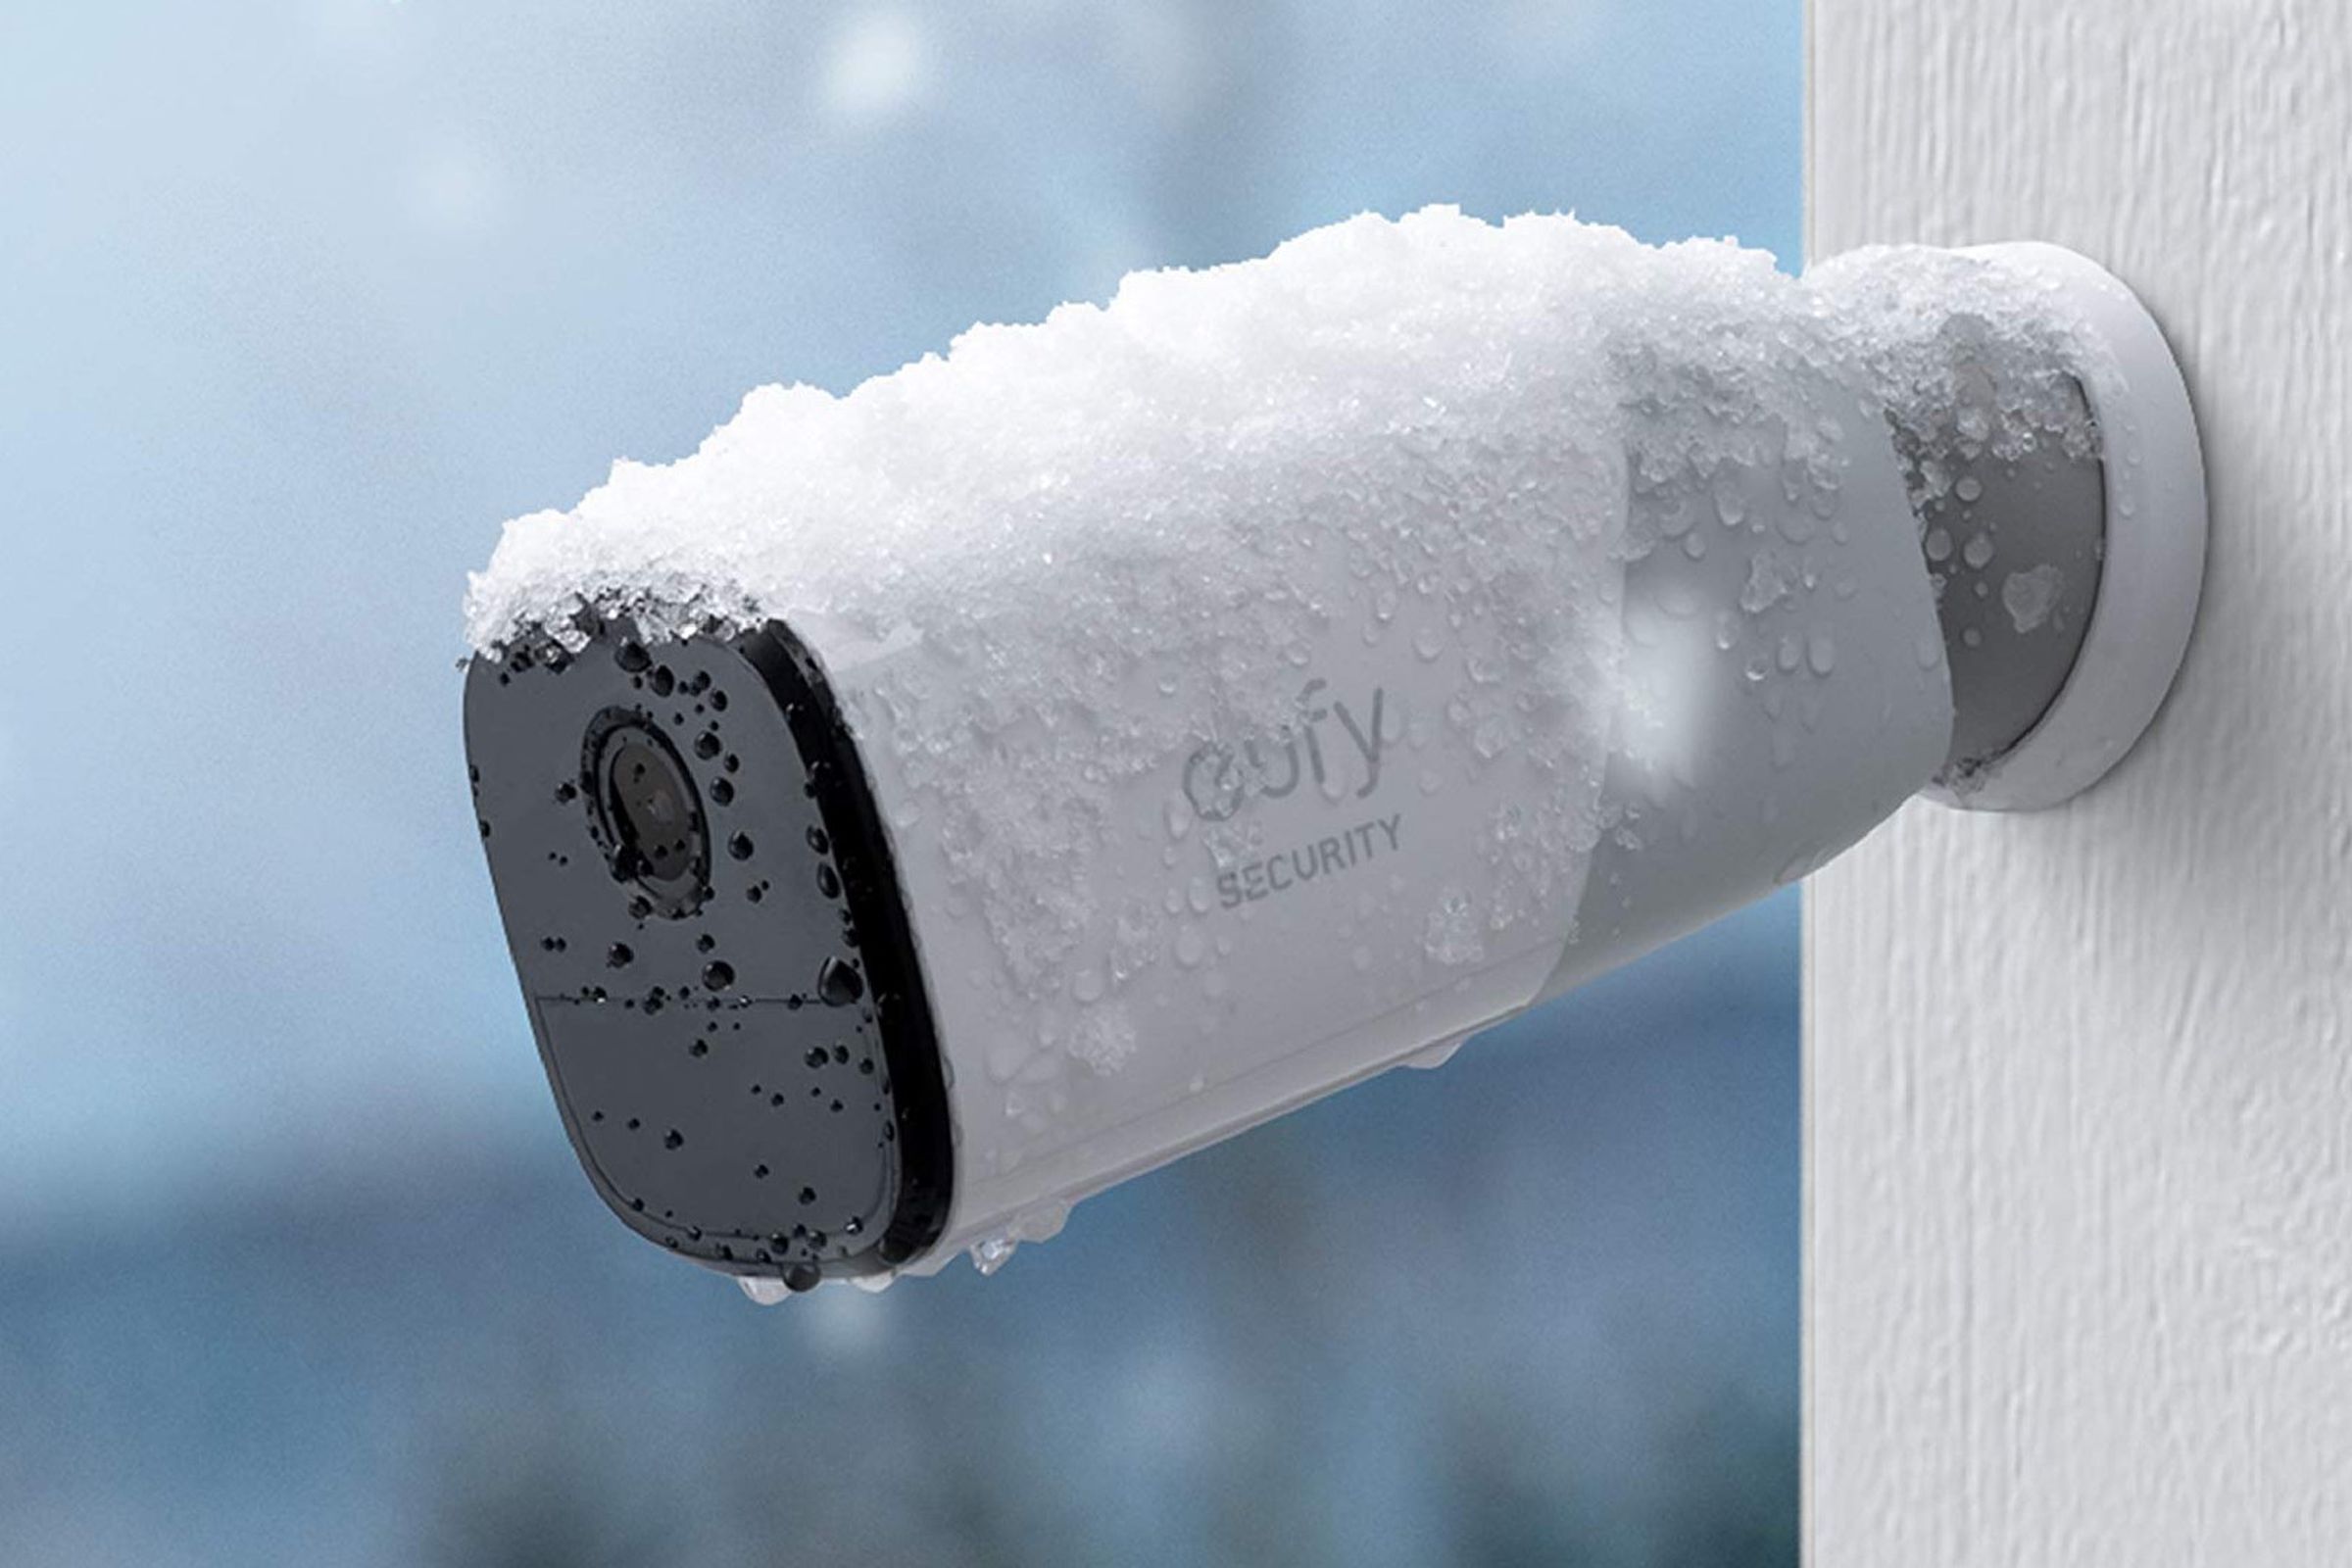 A Eufy camera covered in snow.﻿